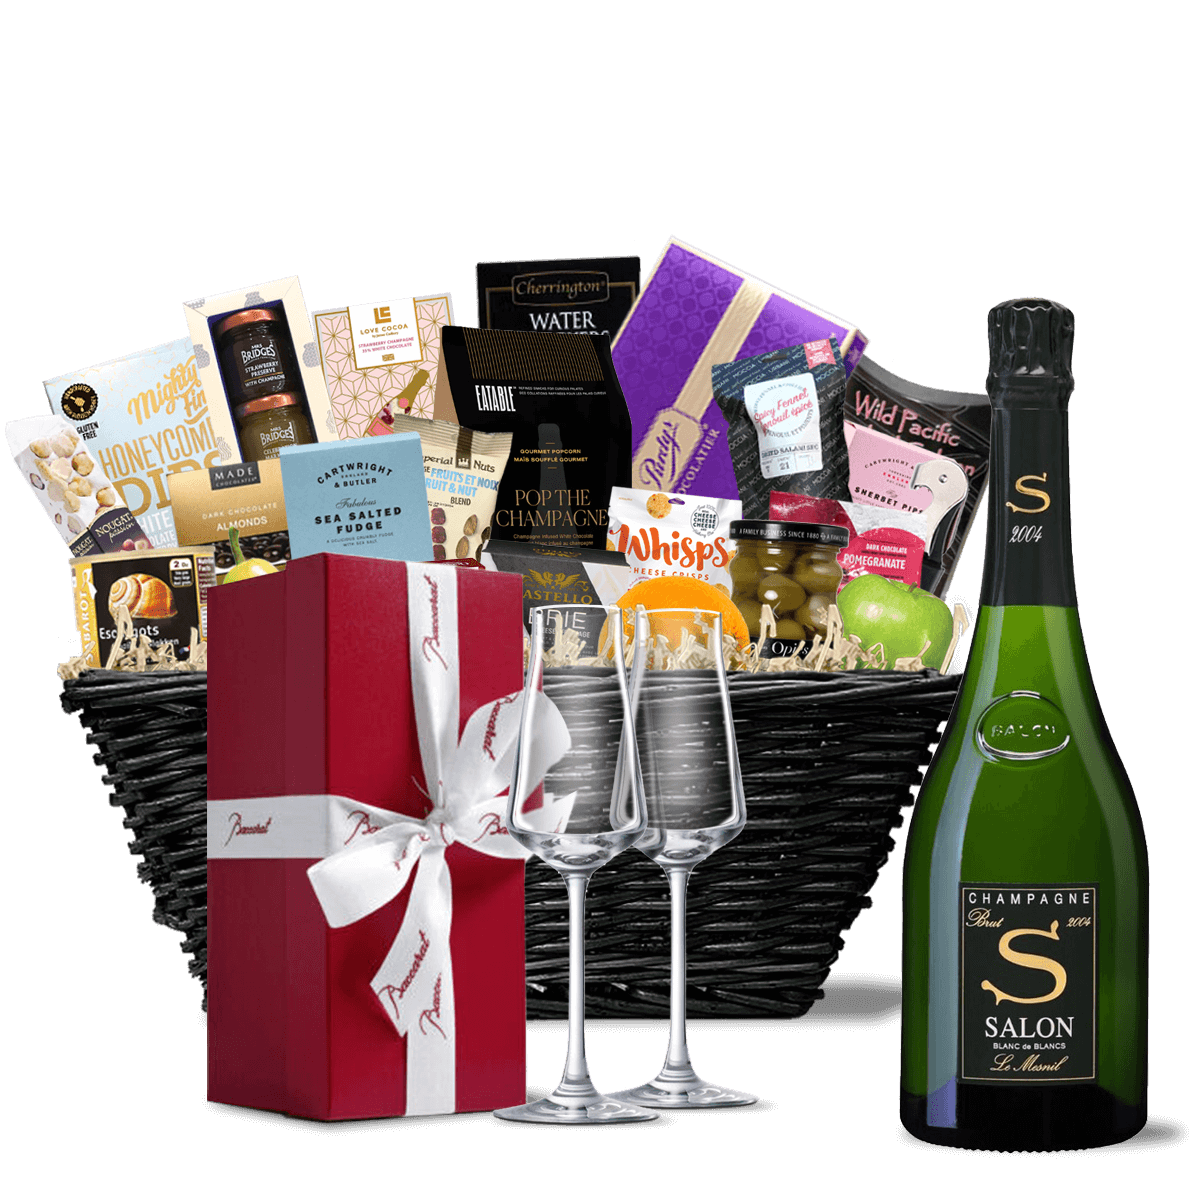 TAG Liquor Stores BC - Salon Le Mesnil Champagne 2004 Ultra Luxe Gift Basket